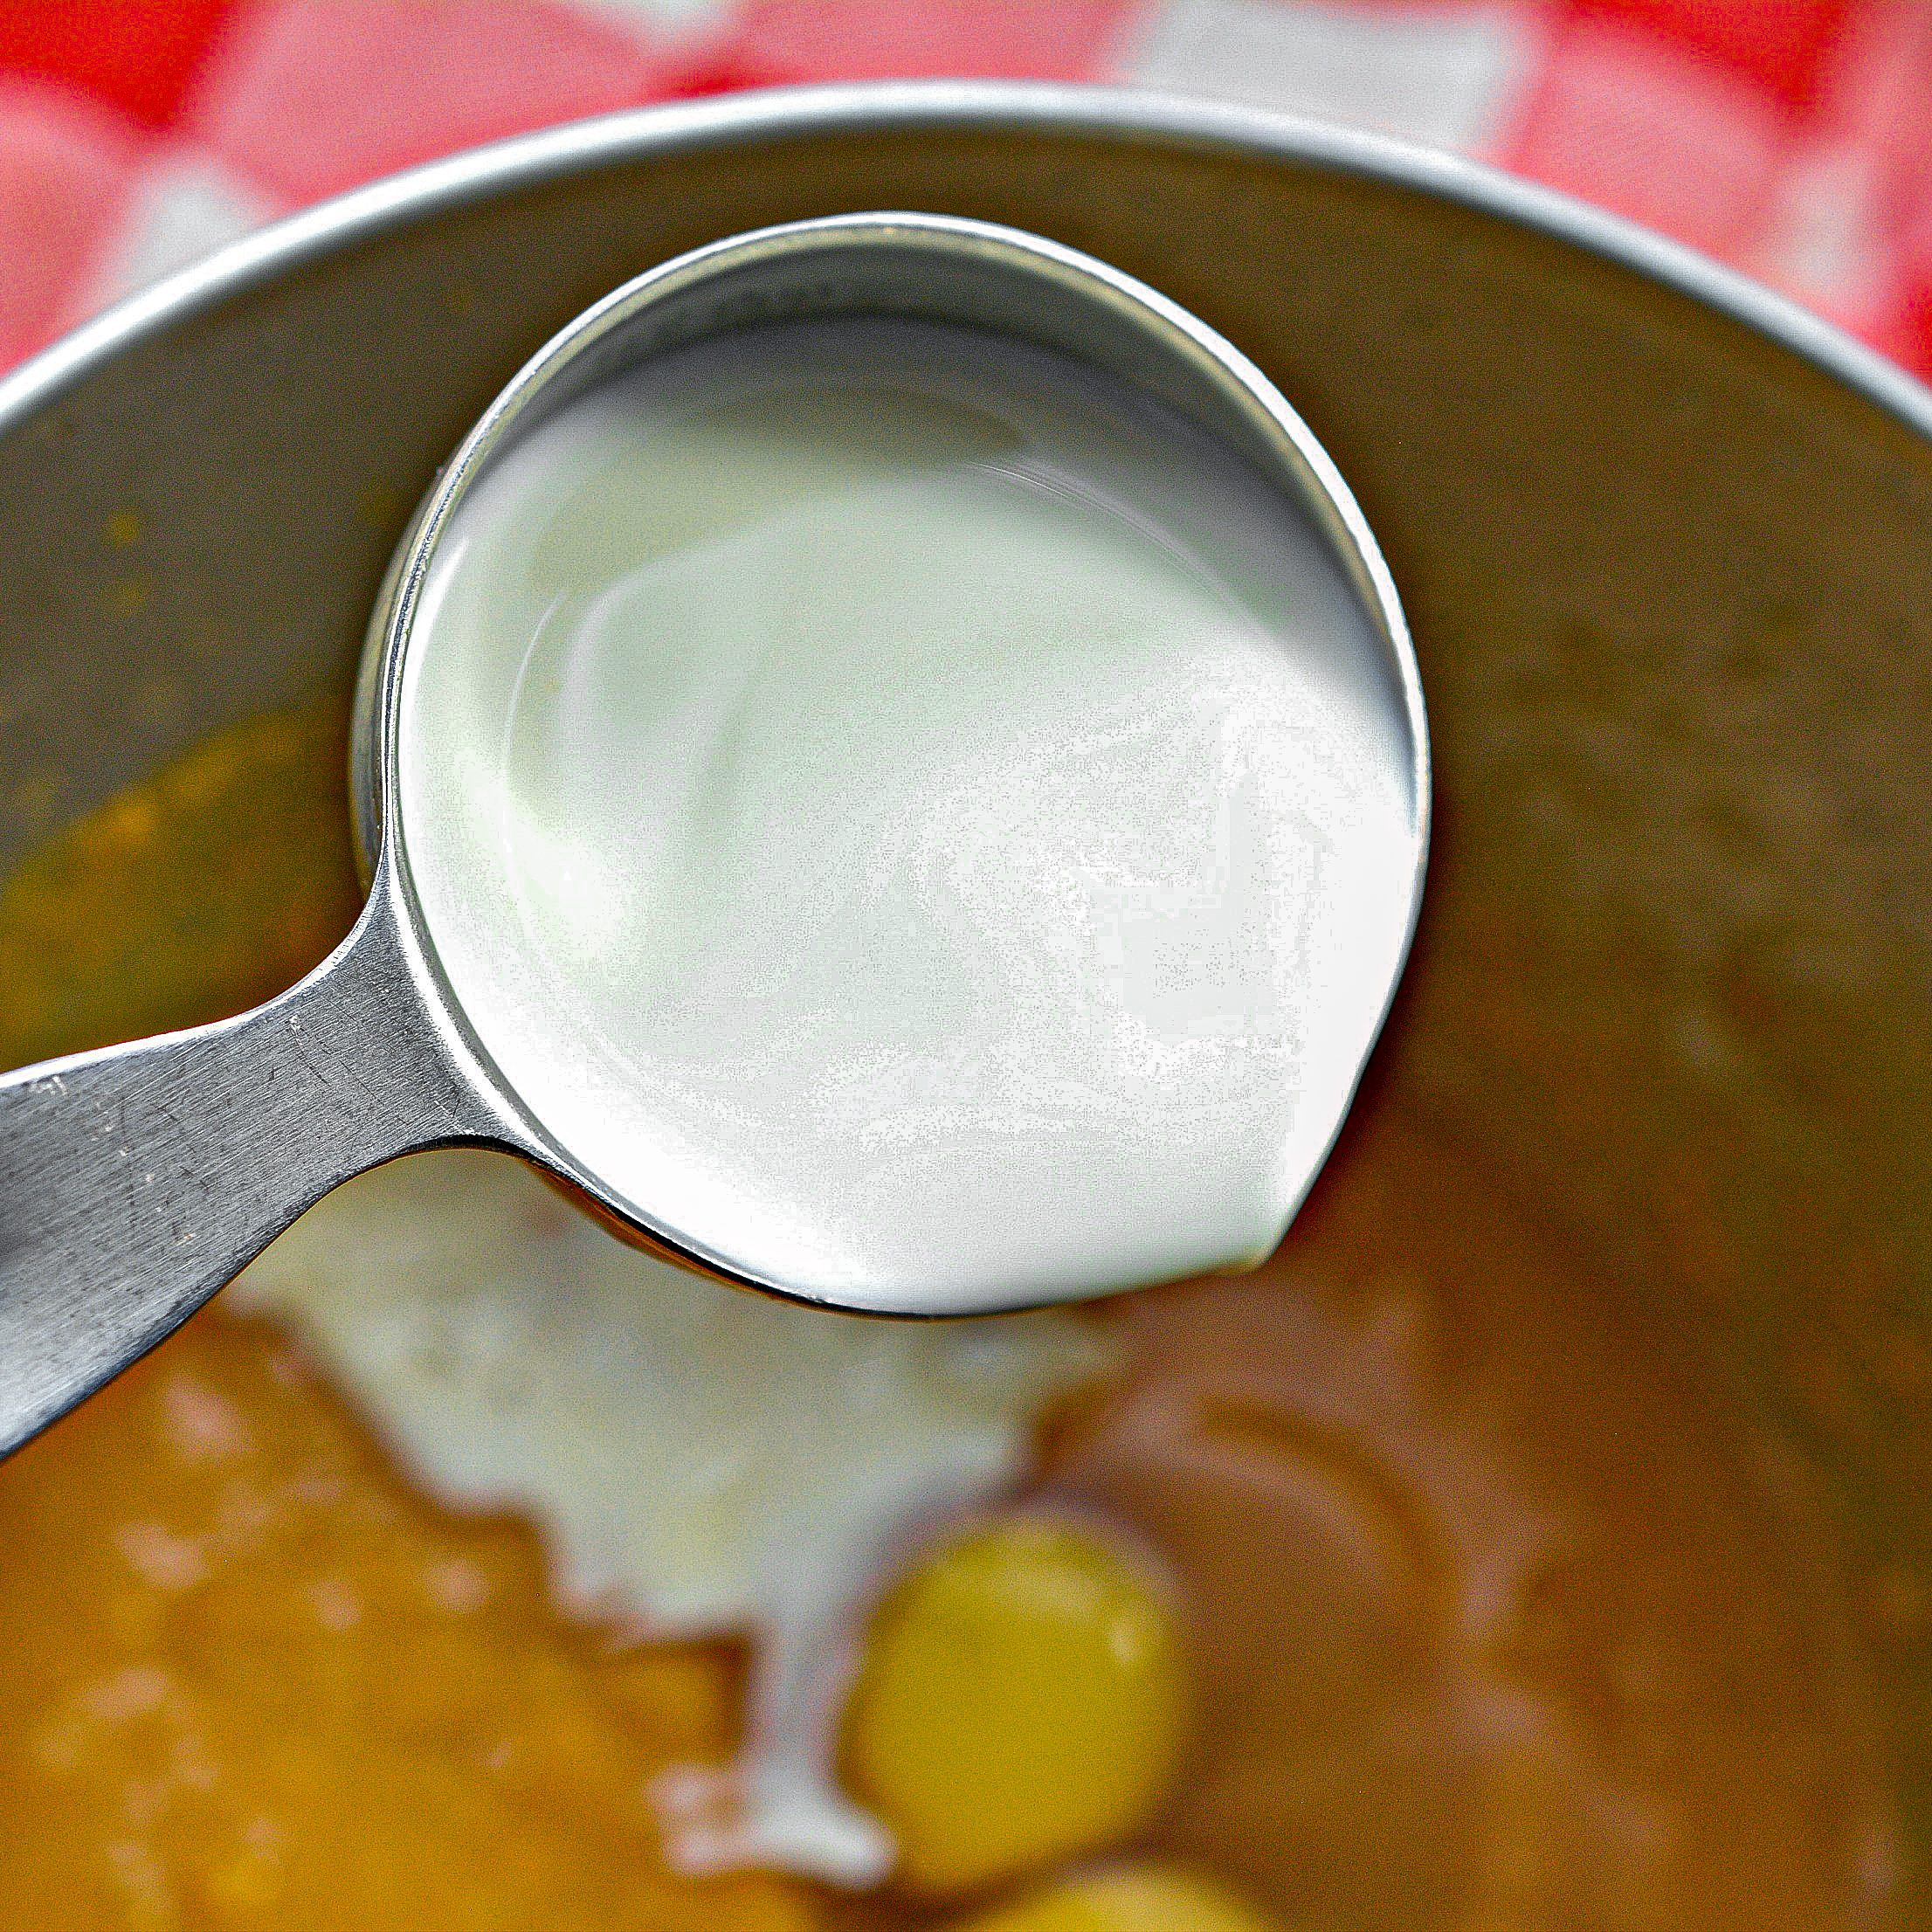 Put the eggs and vanilla into the bowl with the mixture and beat again until smooth and creamy.